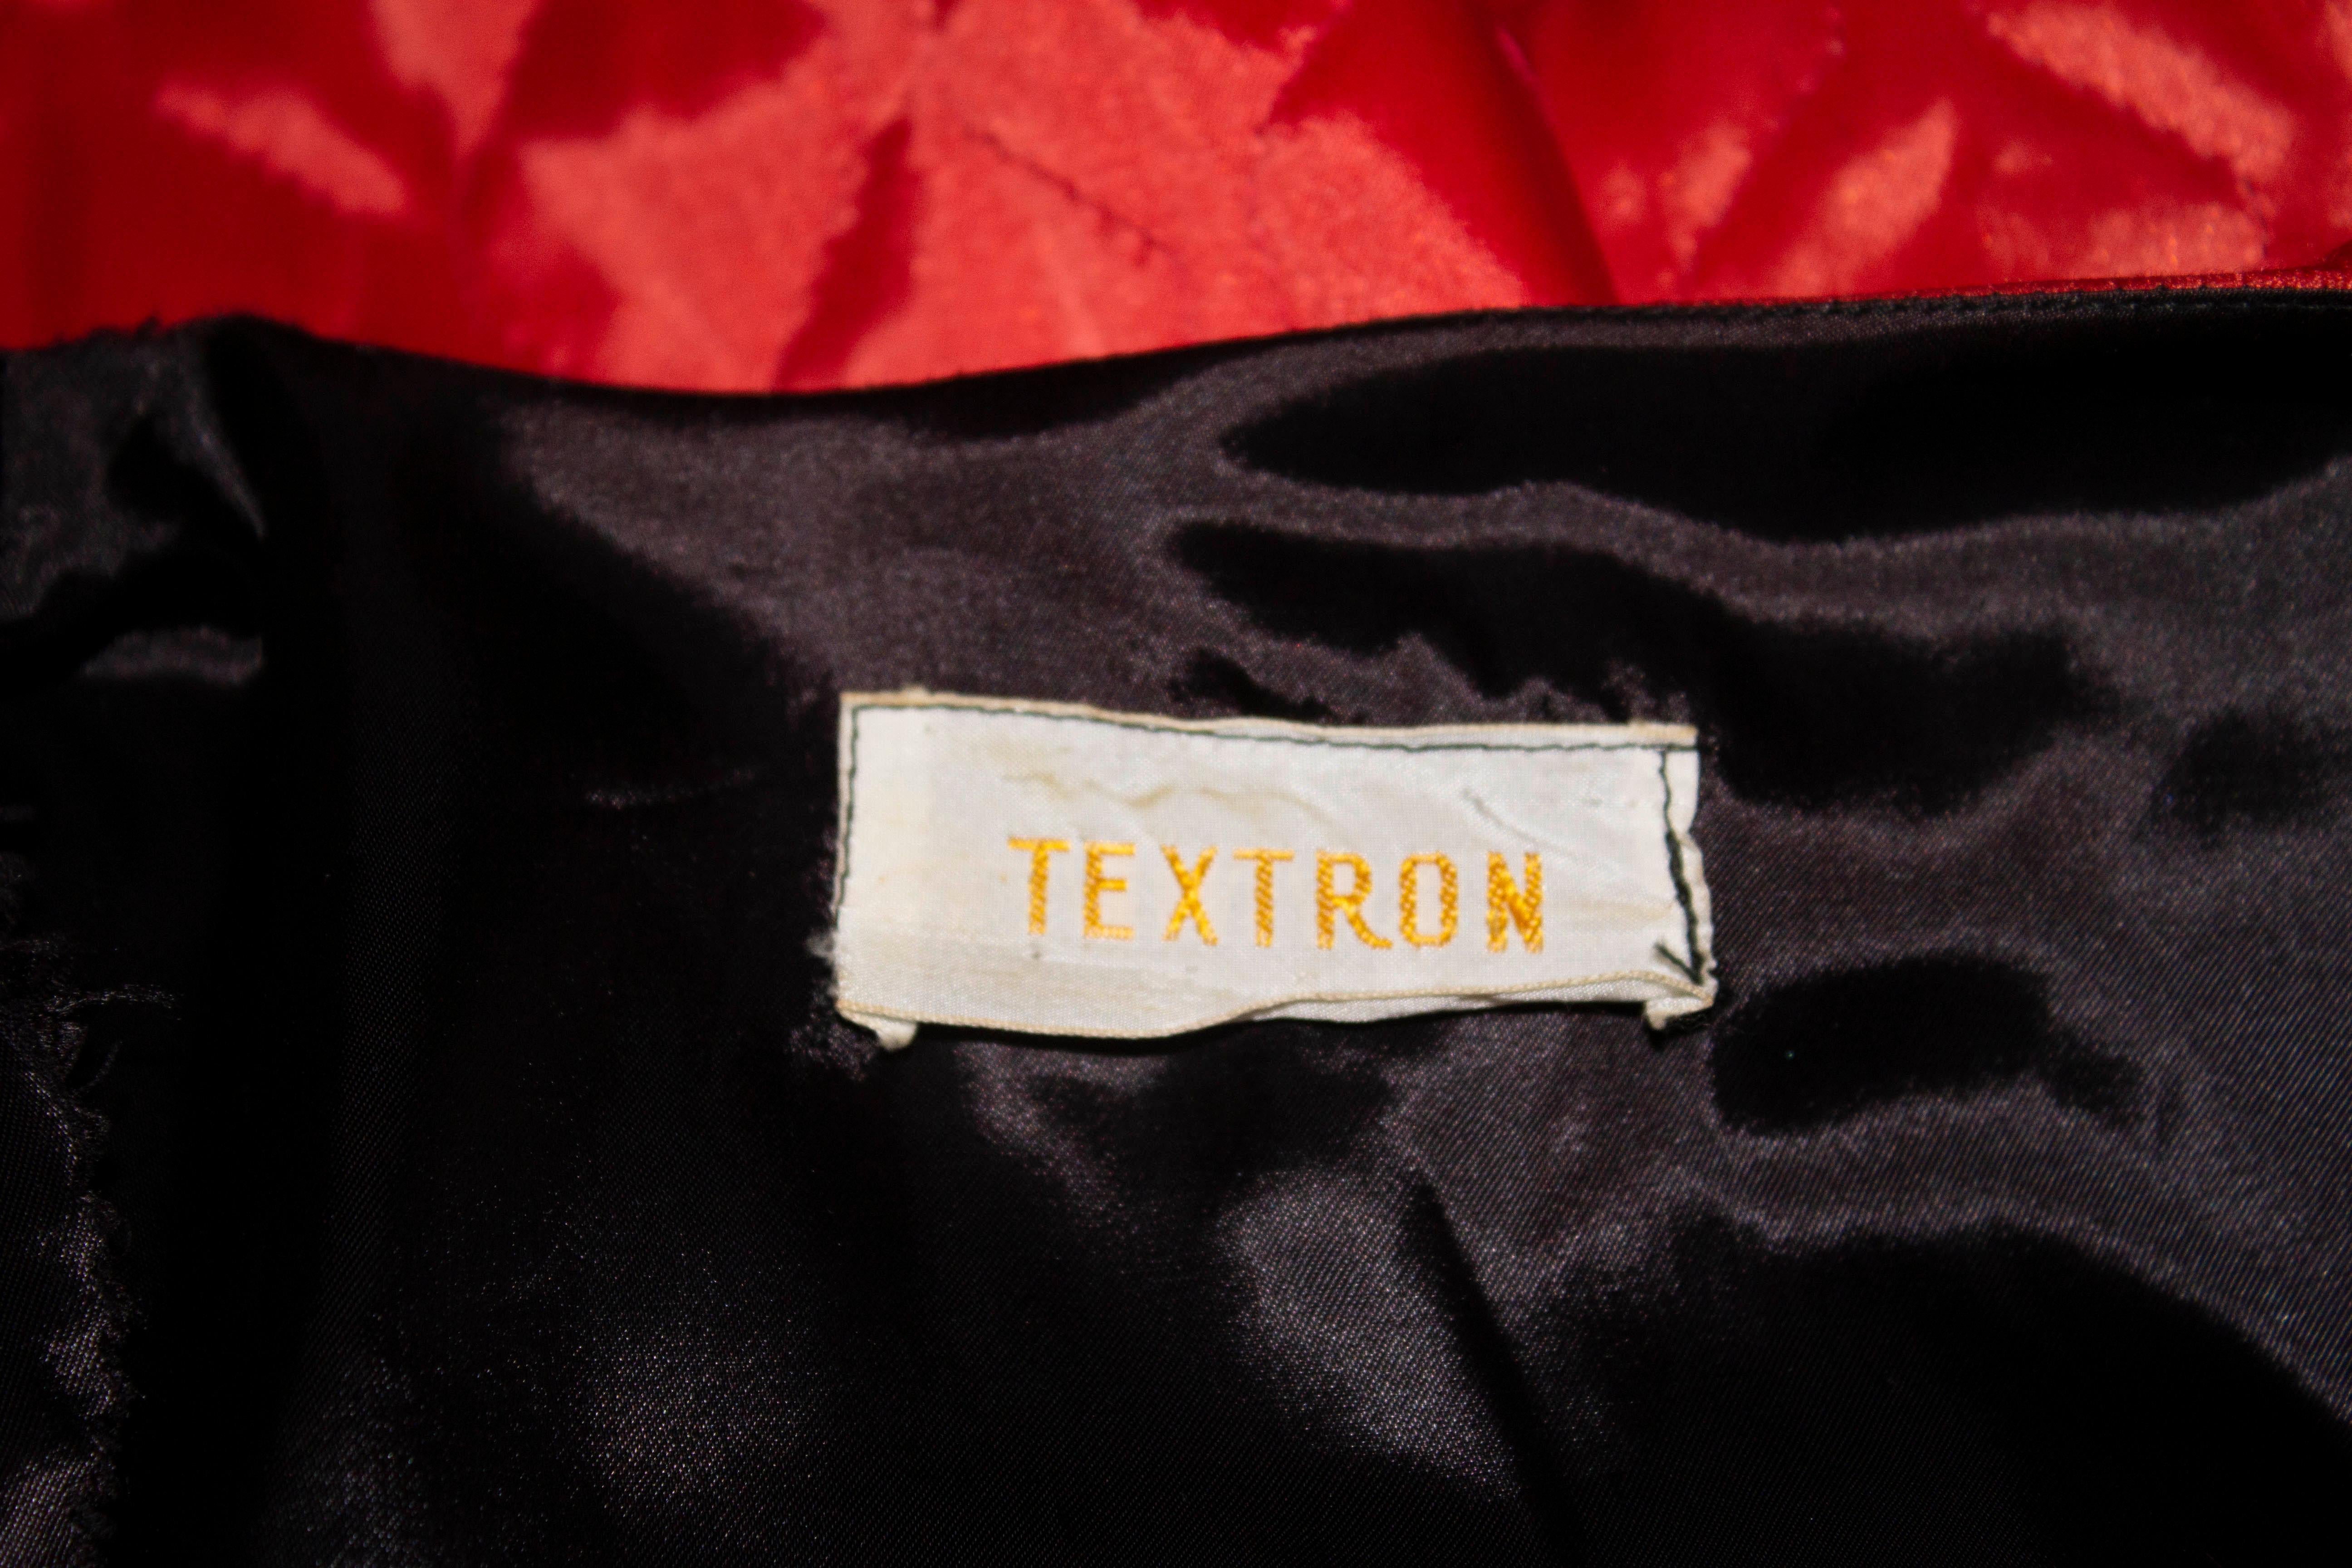 A fun vintage jacket by Textron. The jacket is in a red quilted fabric with black detail on each side.  There is one patch pocket and x '' slit on either side. The jacket is fully lined and has the original shoulder pads.